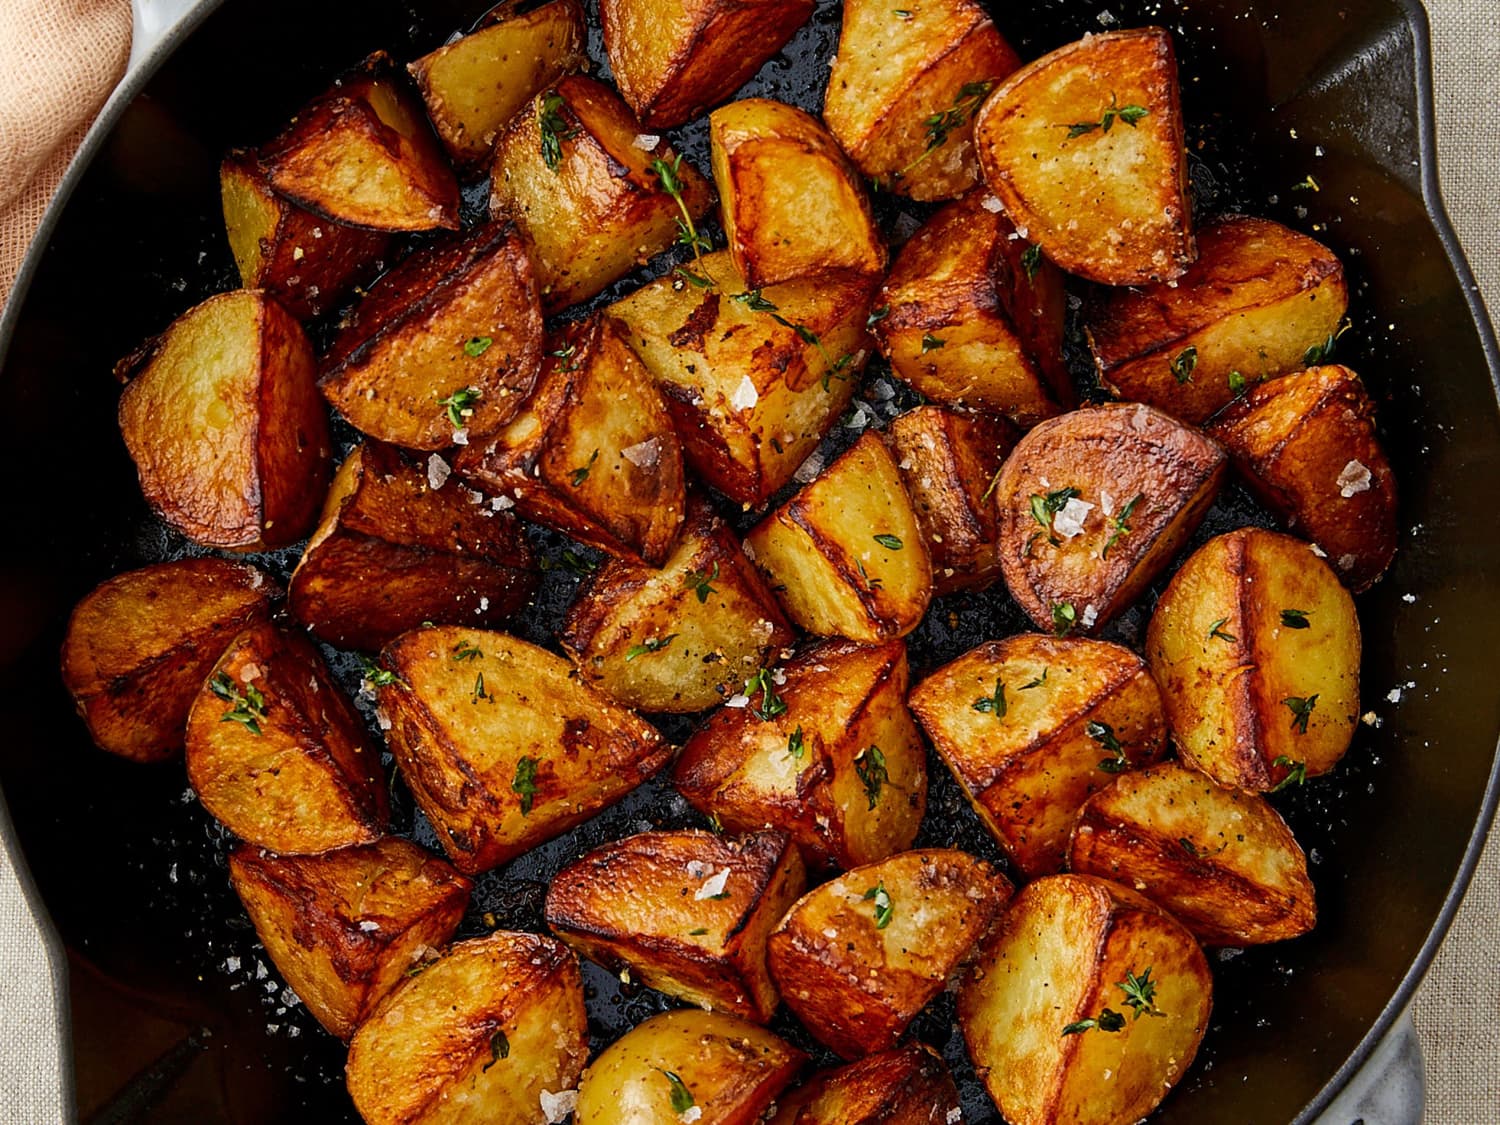 The Rule-Bending Cooking Trick for Impossibly Crispy Potatoes (I Can’t Stop Making Them)